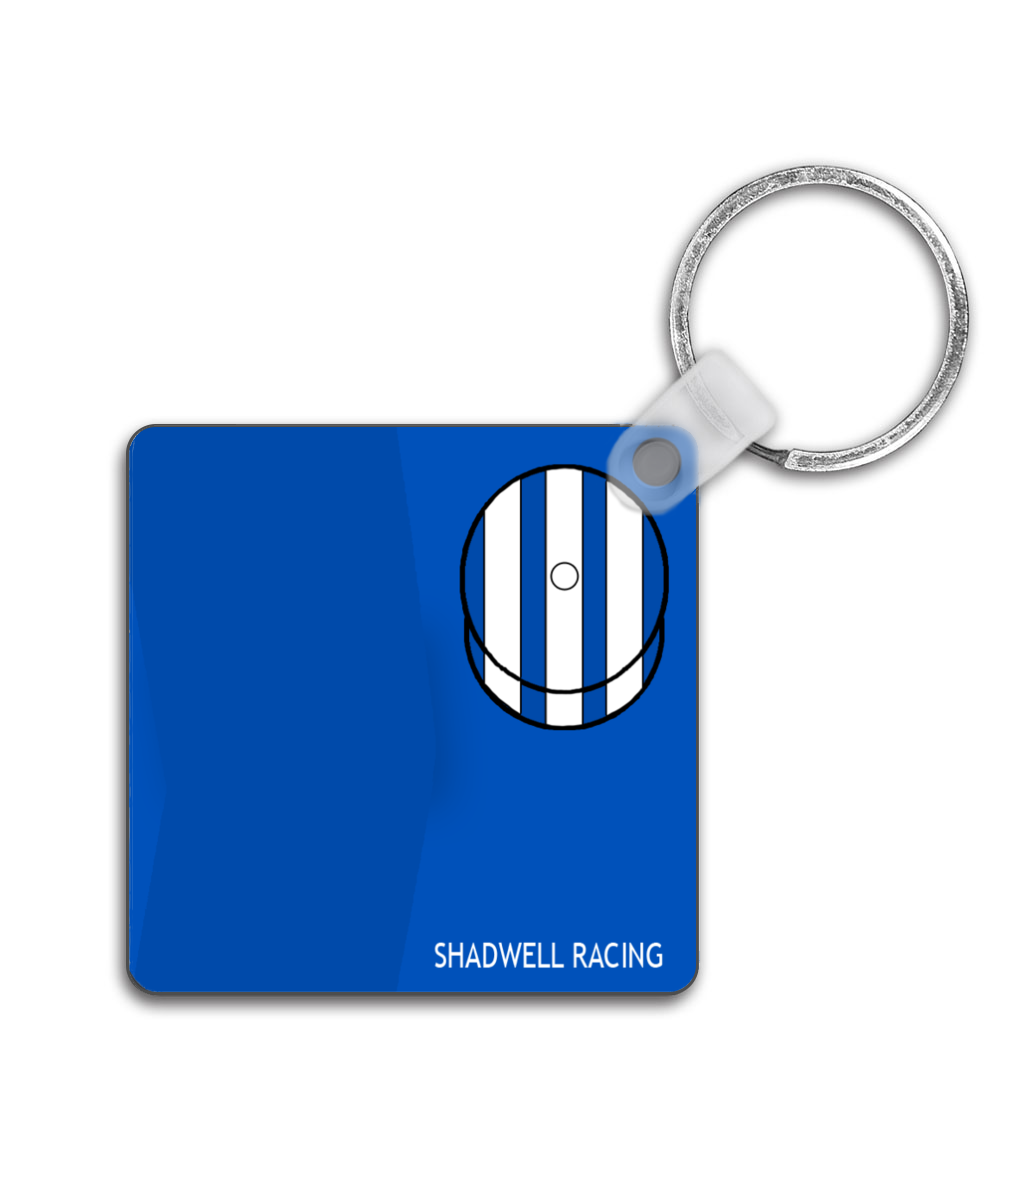 Shadwell Racing - Double Sided Keyring